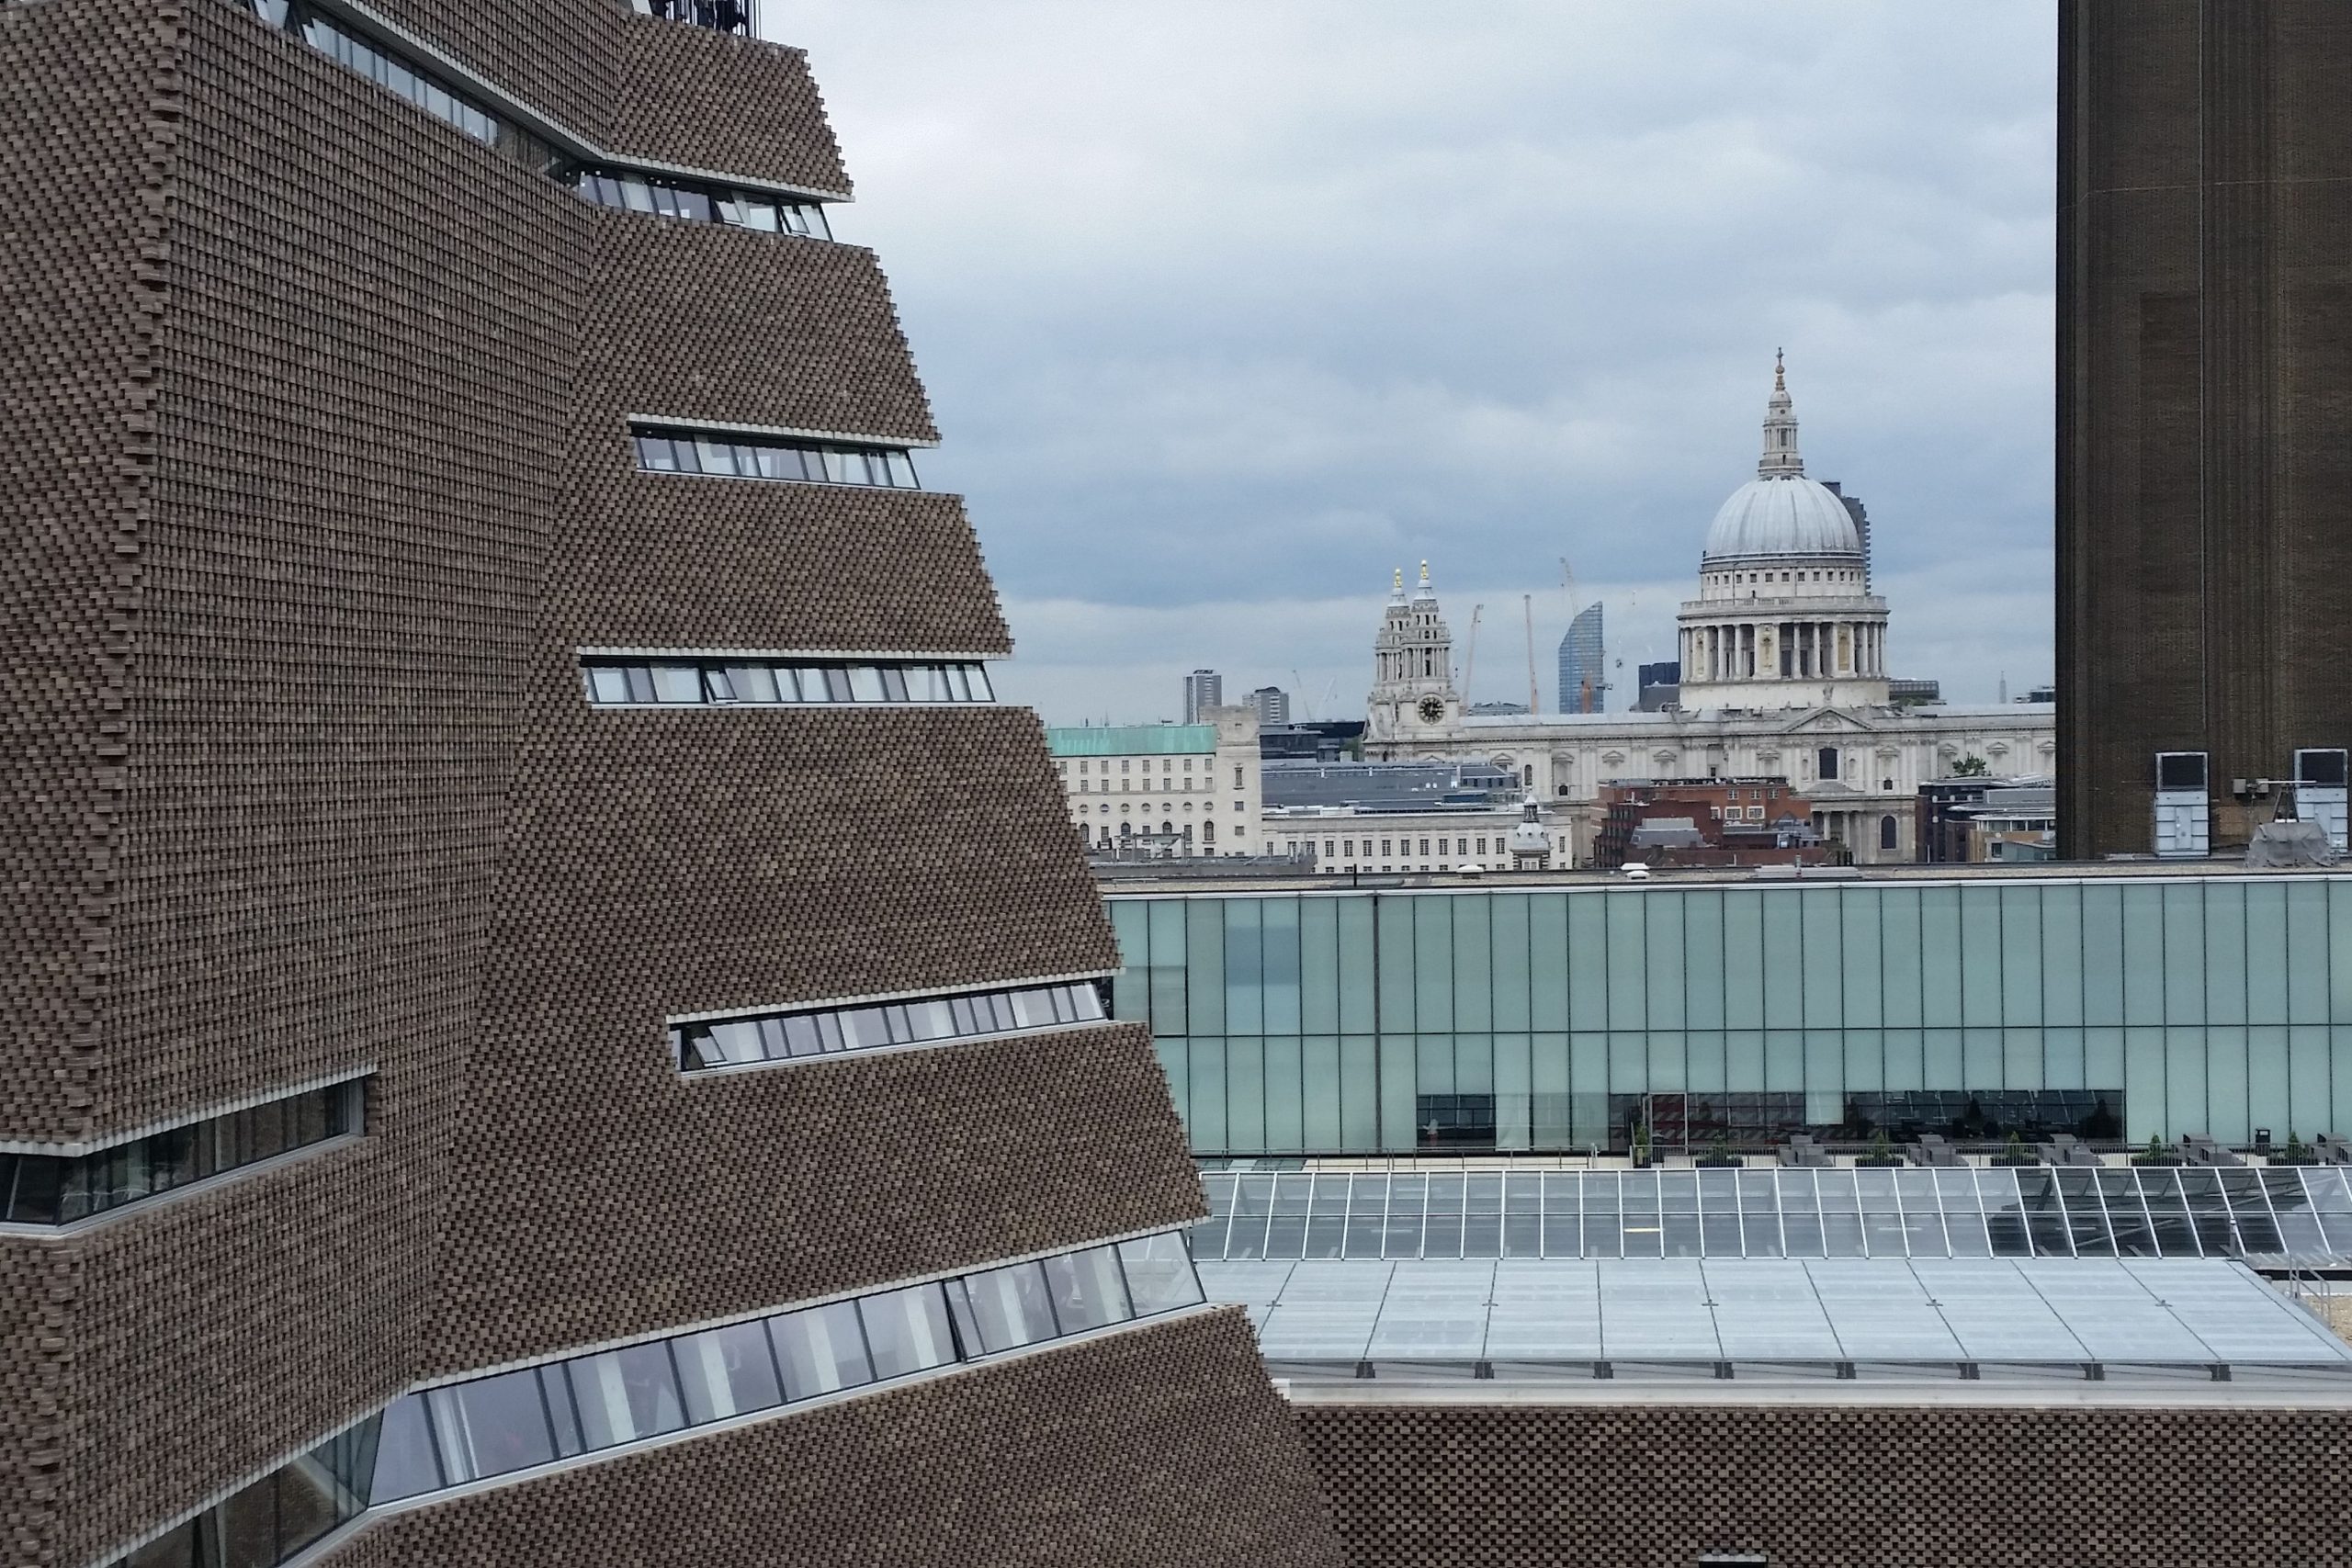 Is a Tate gallery membership worth it?